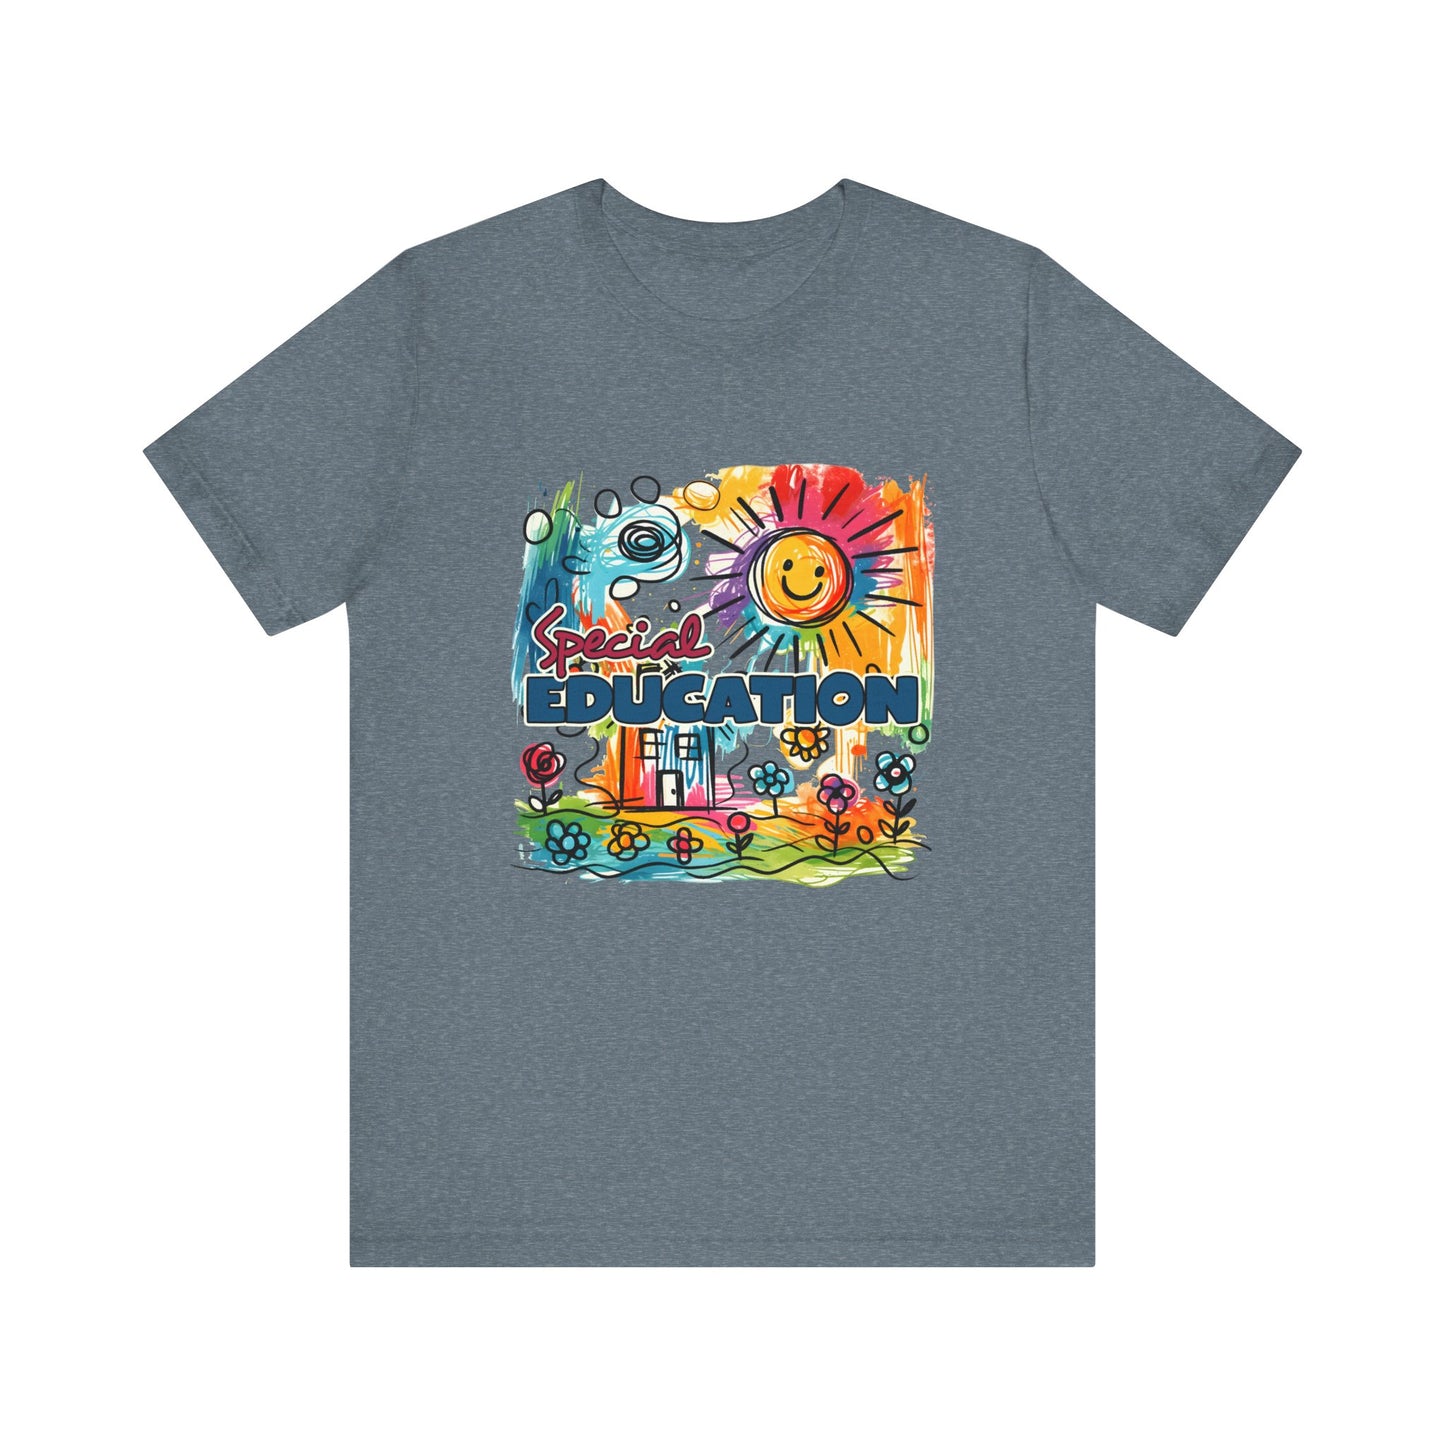 Special Education Autism Advocate Short Sleeve Tee